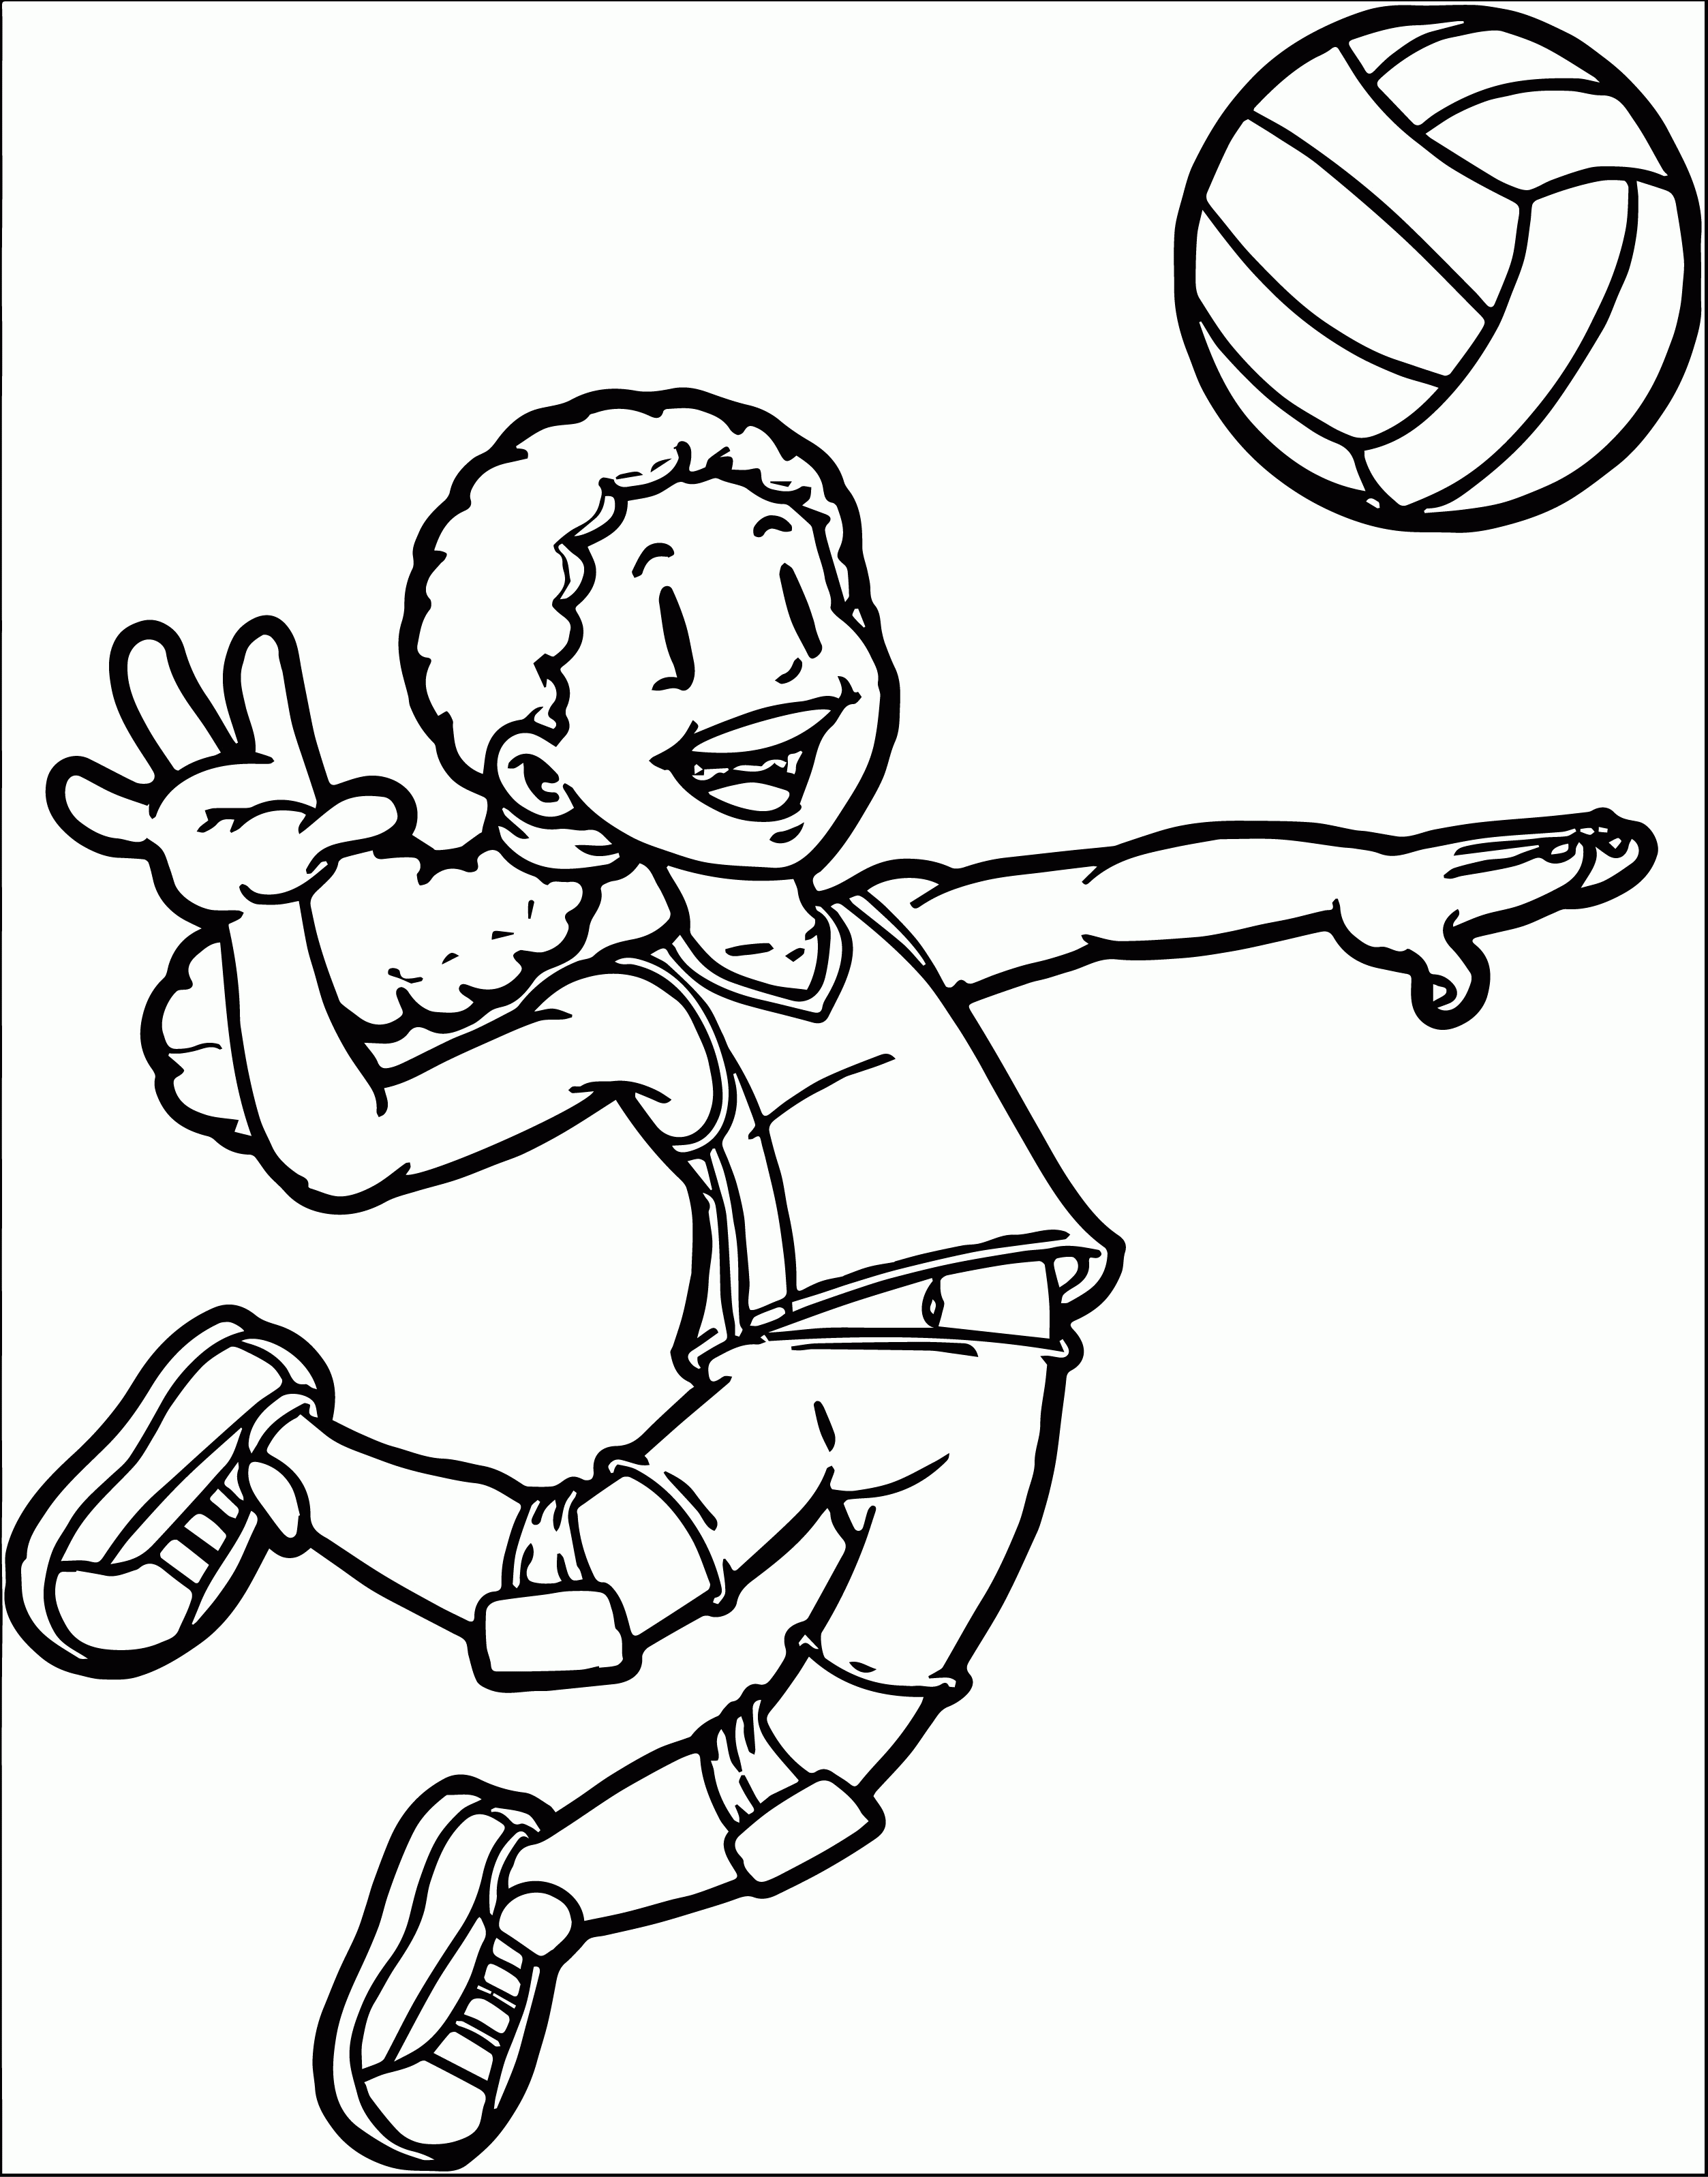 kids-sports-coloring-pages-coloring-pages